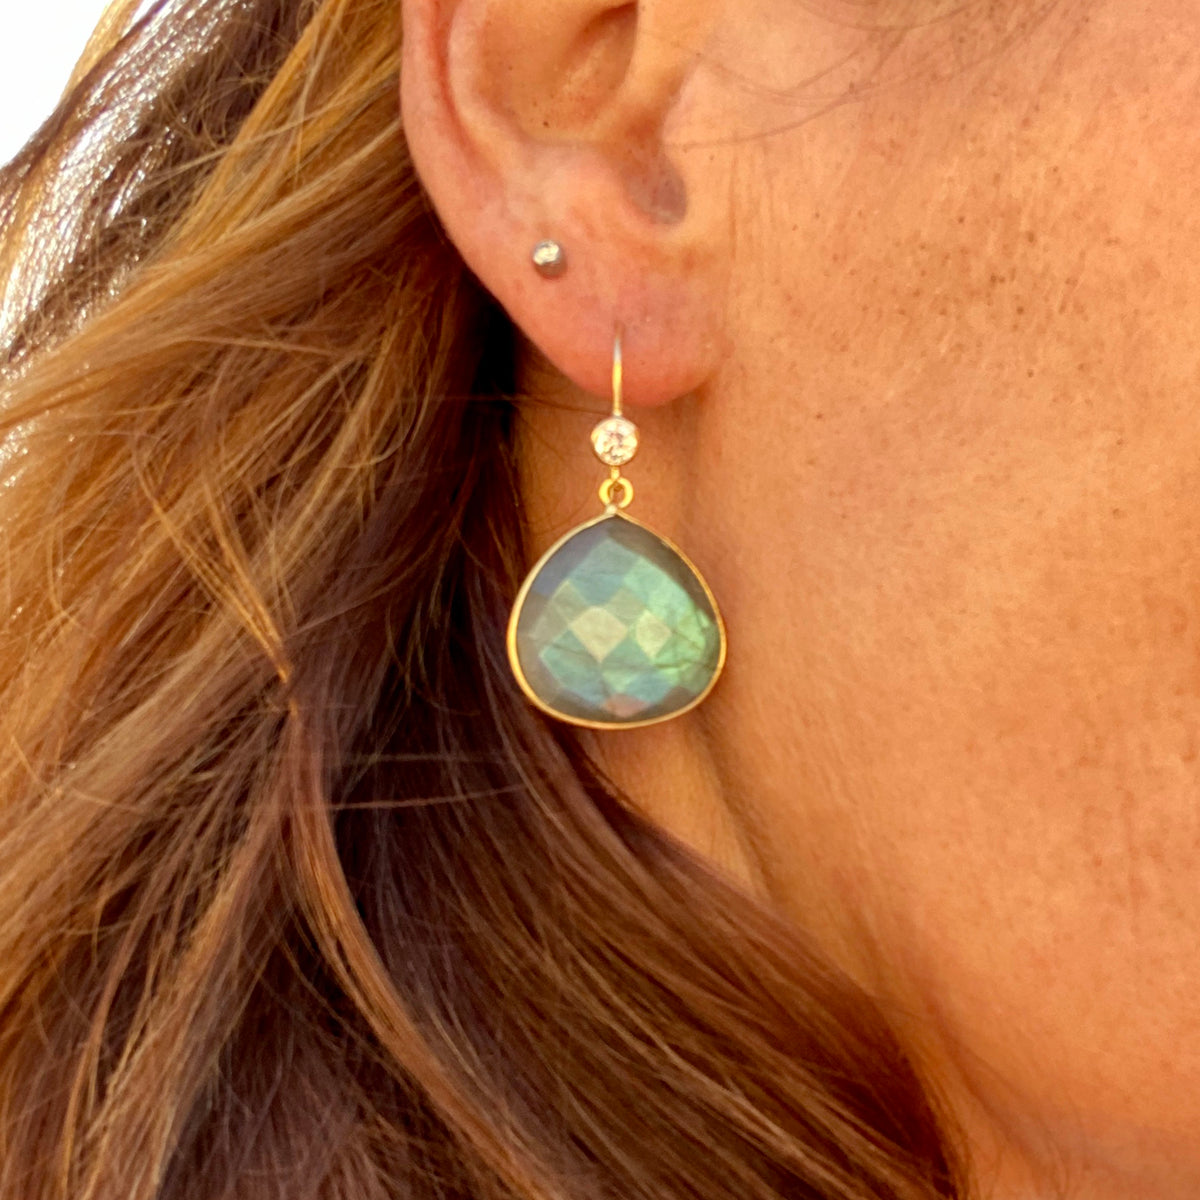 Depression Awareness Earrings - Wear Labradorite to Bring Positivity into your Life!